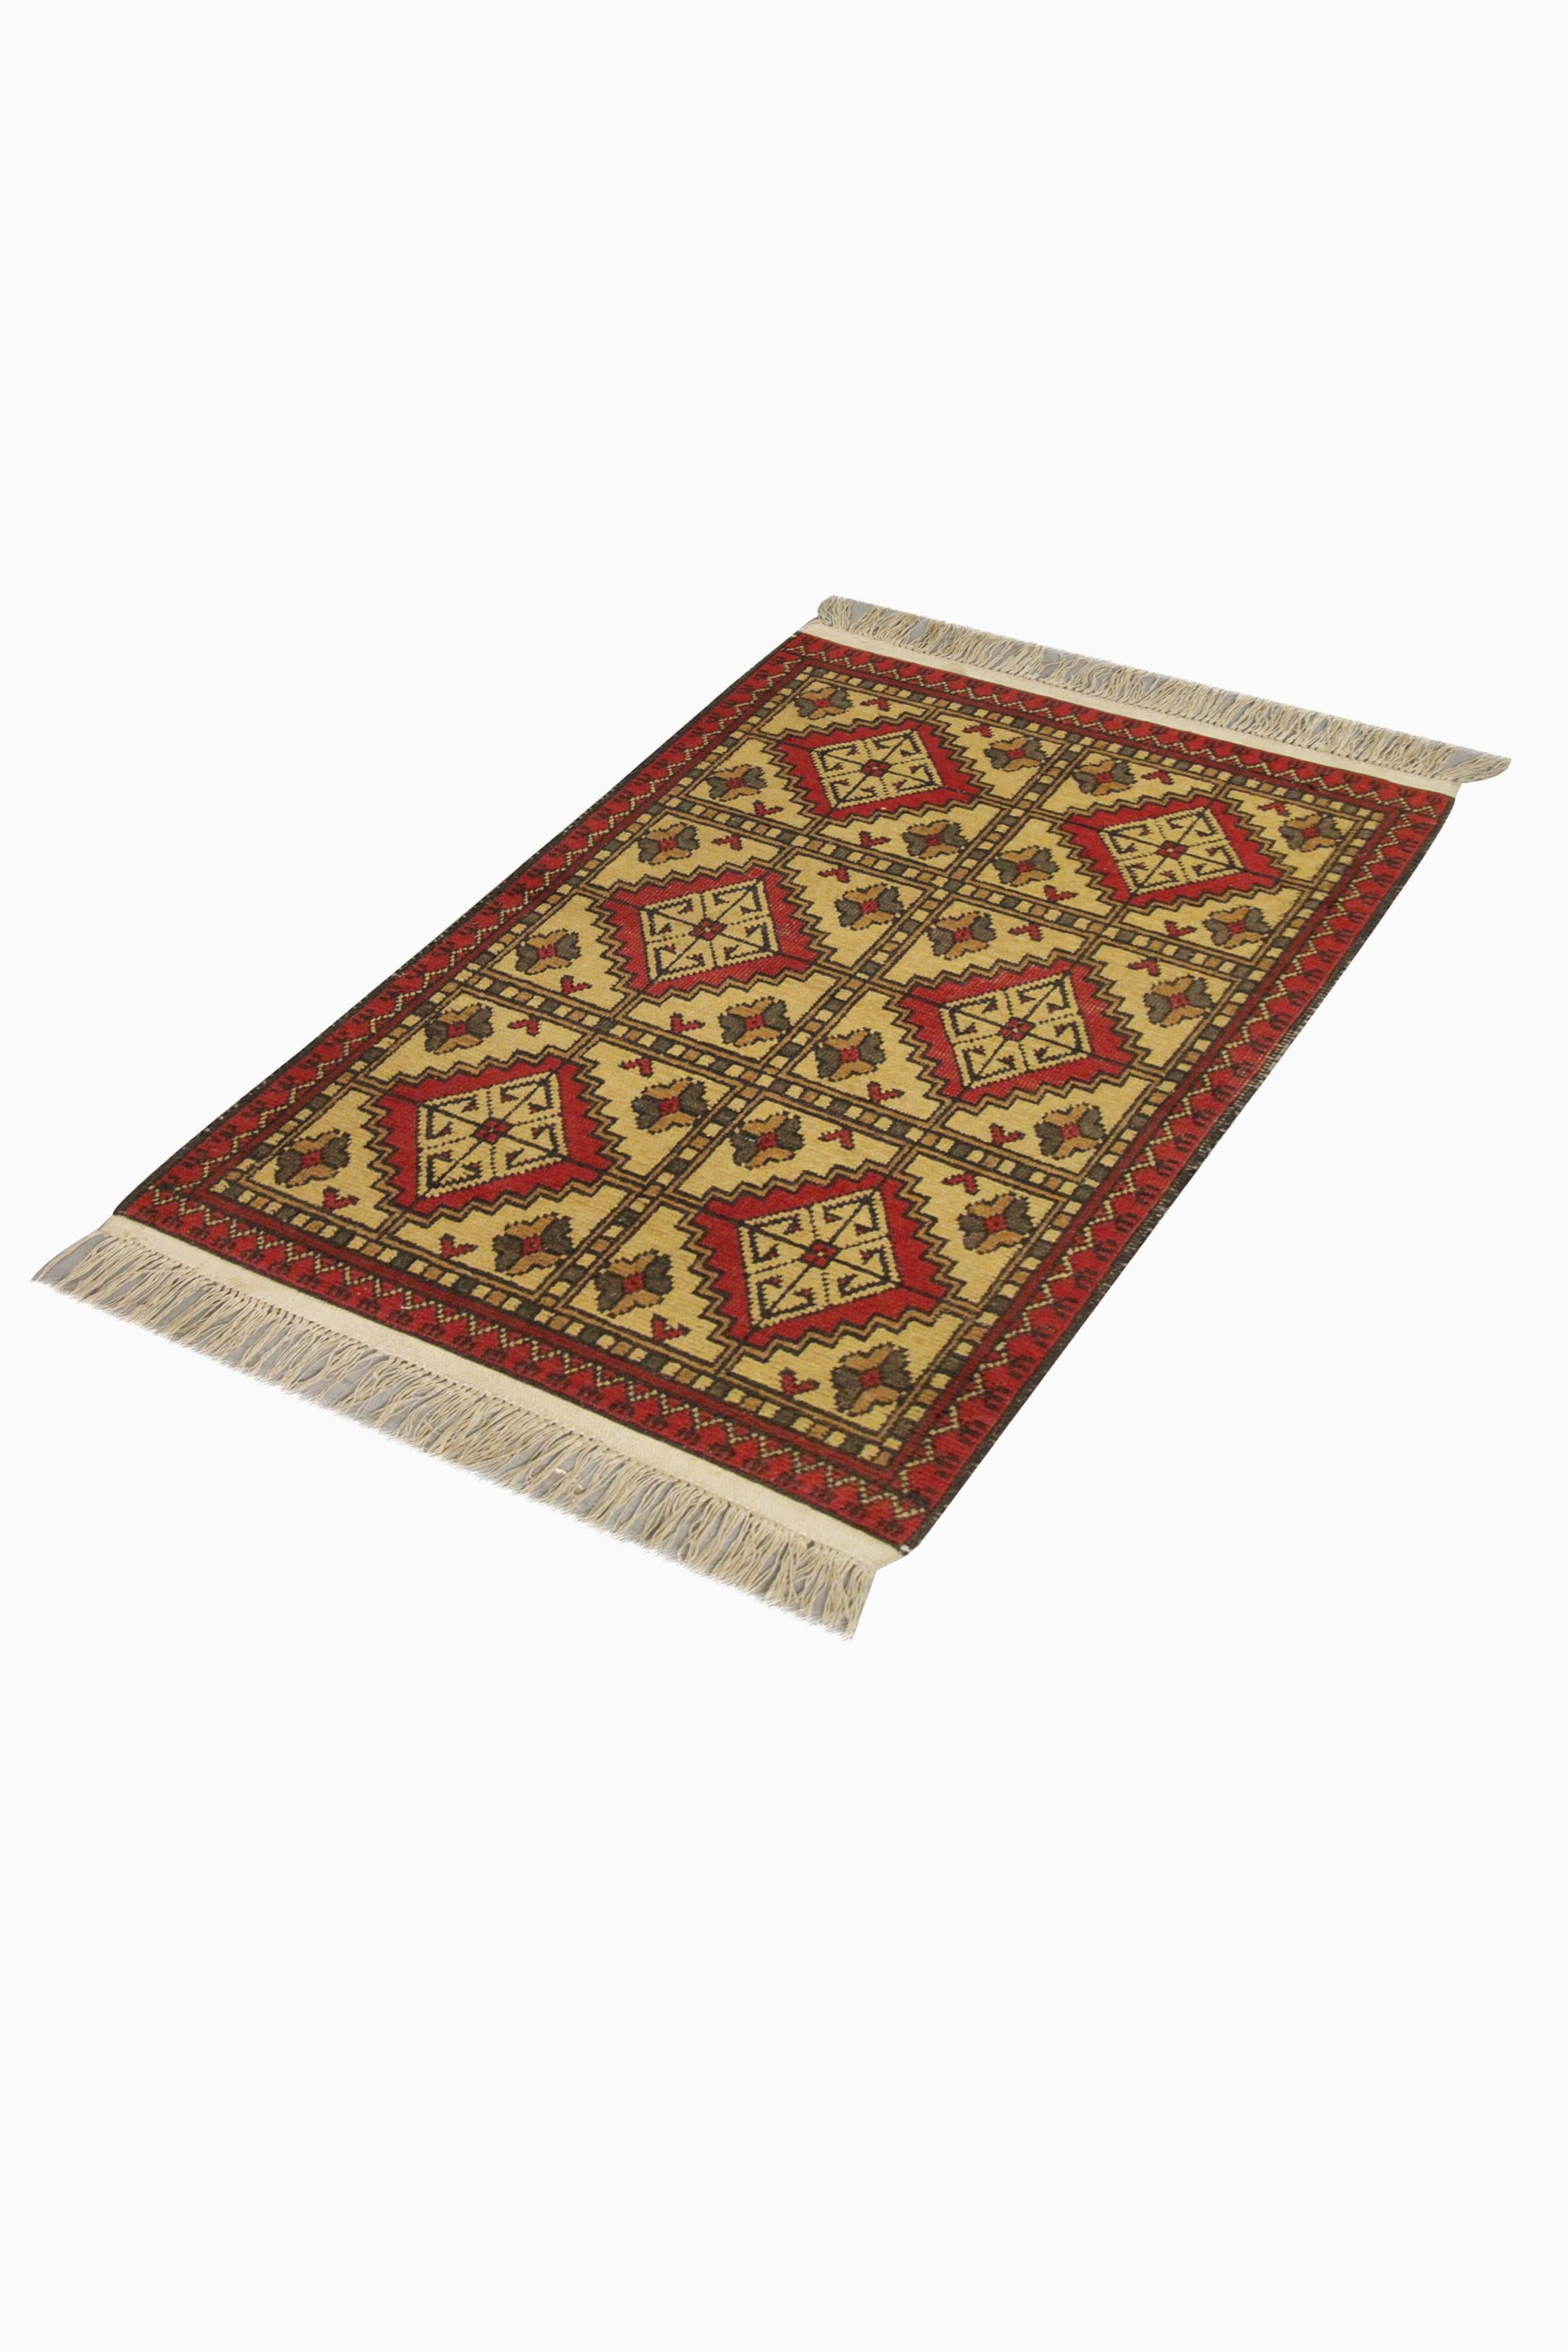 This bold wool area rug is a handwoven carpet constructed in the late 20th century. The design features a repeating geometric pattern woven in a simple beige, red, gold yellow and blue colour palette. The colour palette and geometry in this carpet